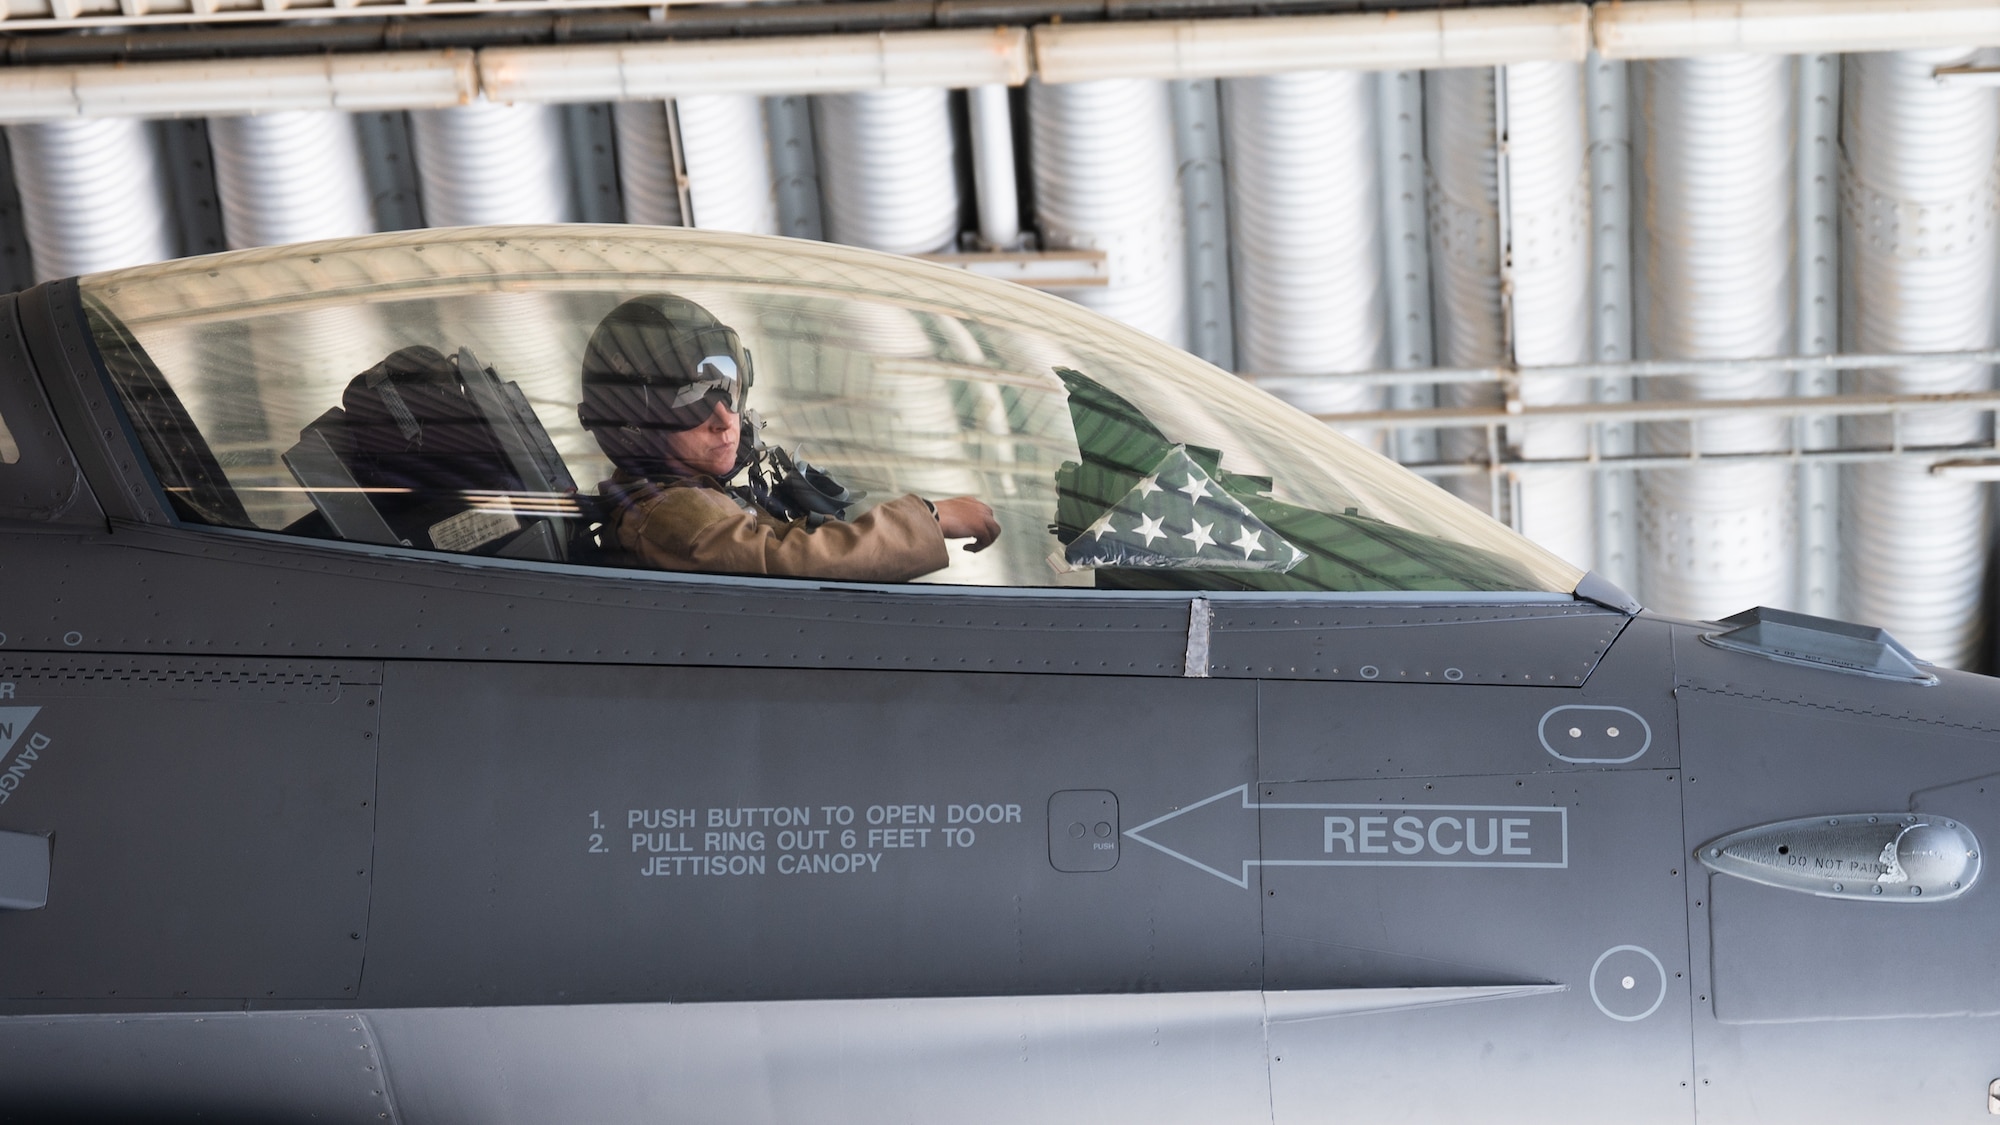 A 176th Expeditionary Fighter Squadron pilot, sits in the cockpit of an F-16 Fighting Falcon while being refueled at King Fahad Air Base, Saudi Arabia, Dec. 7, 2021. U.S. and Saudi forces conducted combined operations, further cultivating strong partnerships in order to deter regional aggressors. (U.S. Air Force photo by Senior Airman Jacob B. Wrightsman)